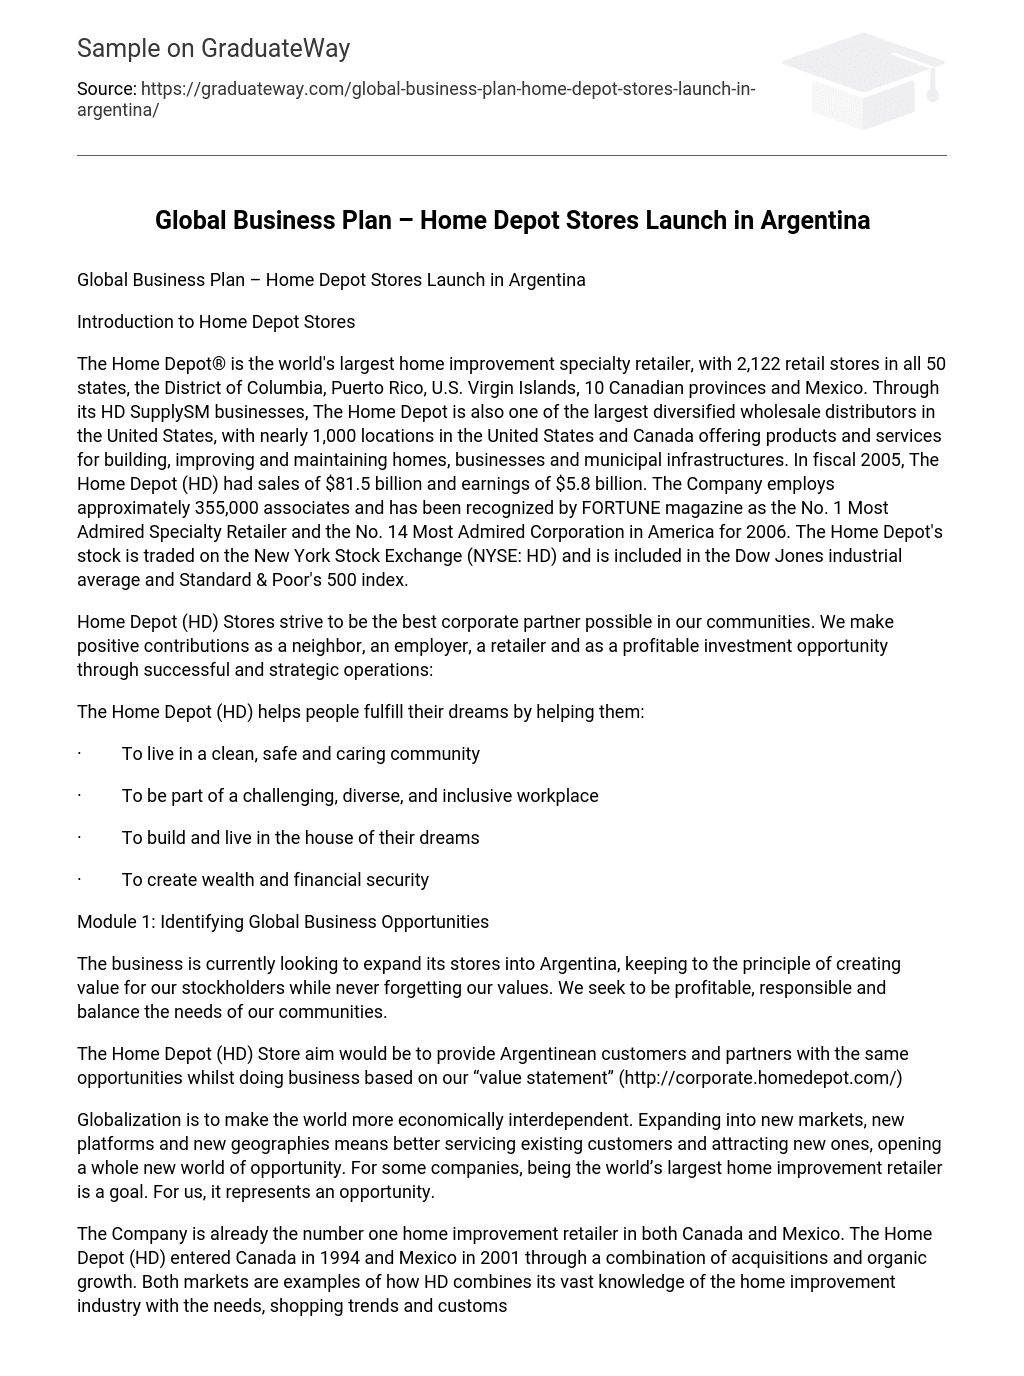 Global Business Plan – Home Depot Stores Launch in Argentina